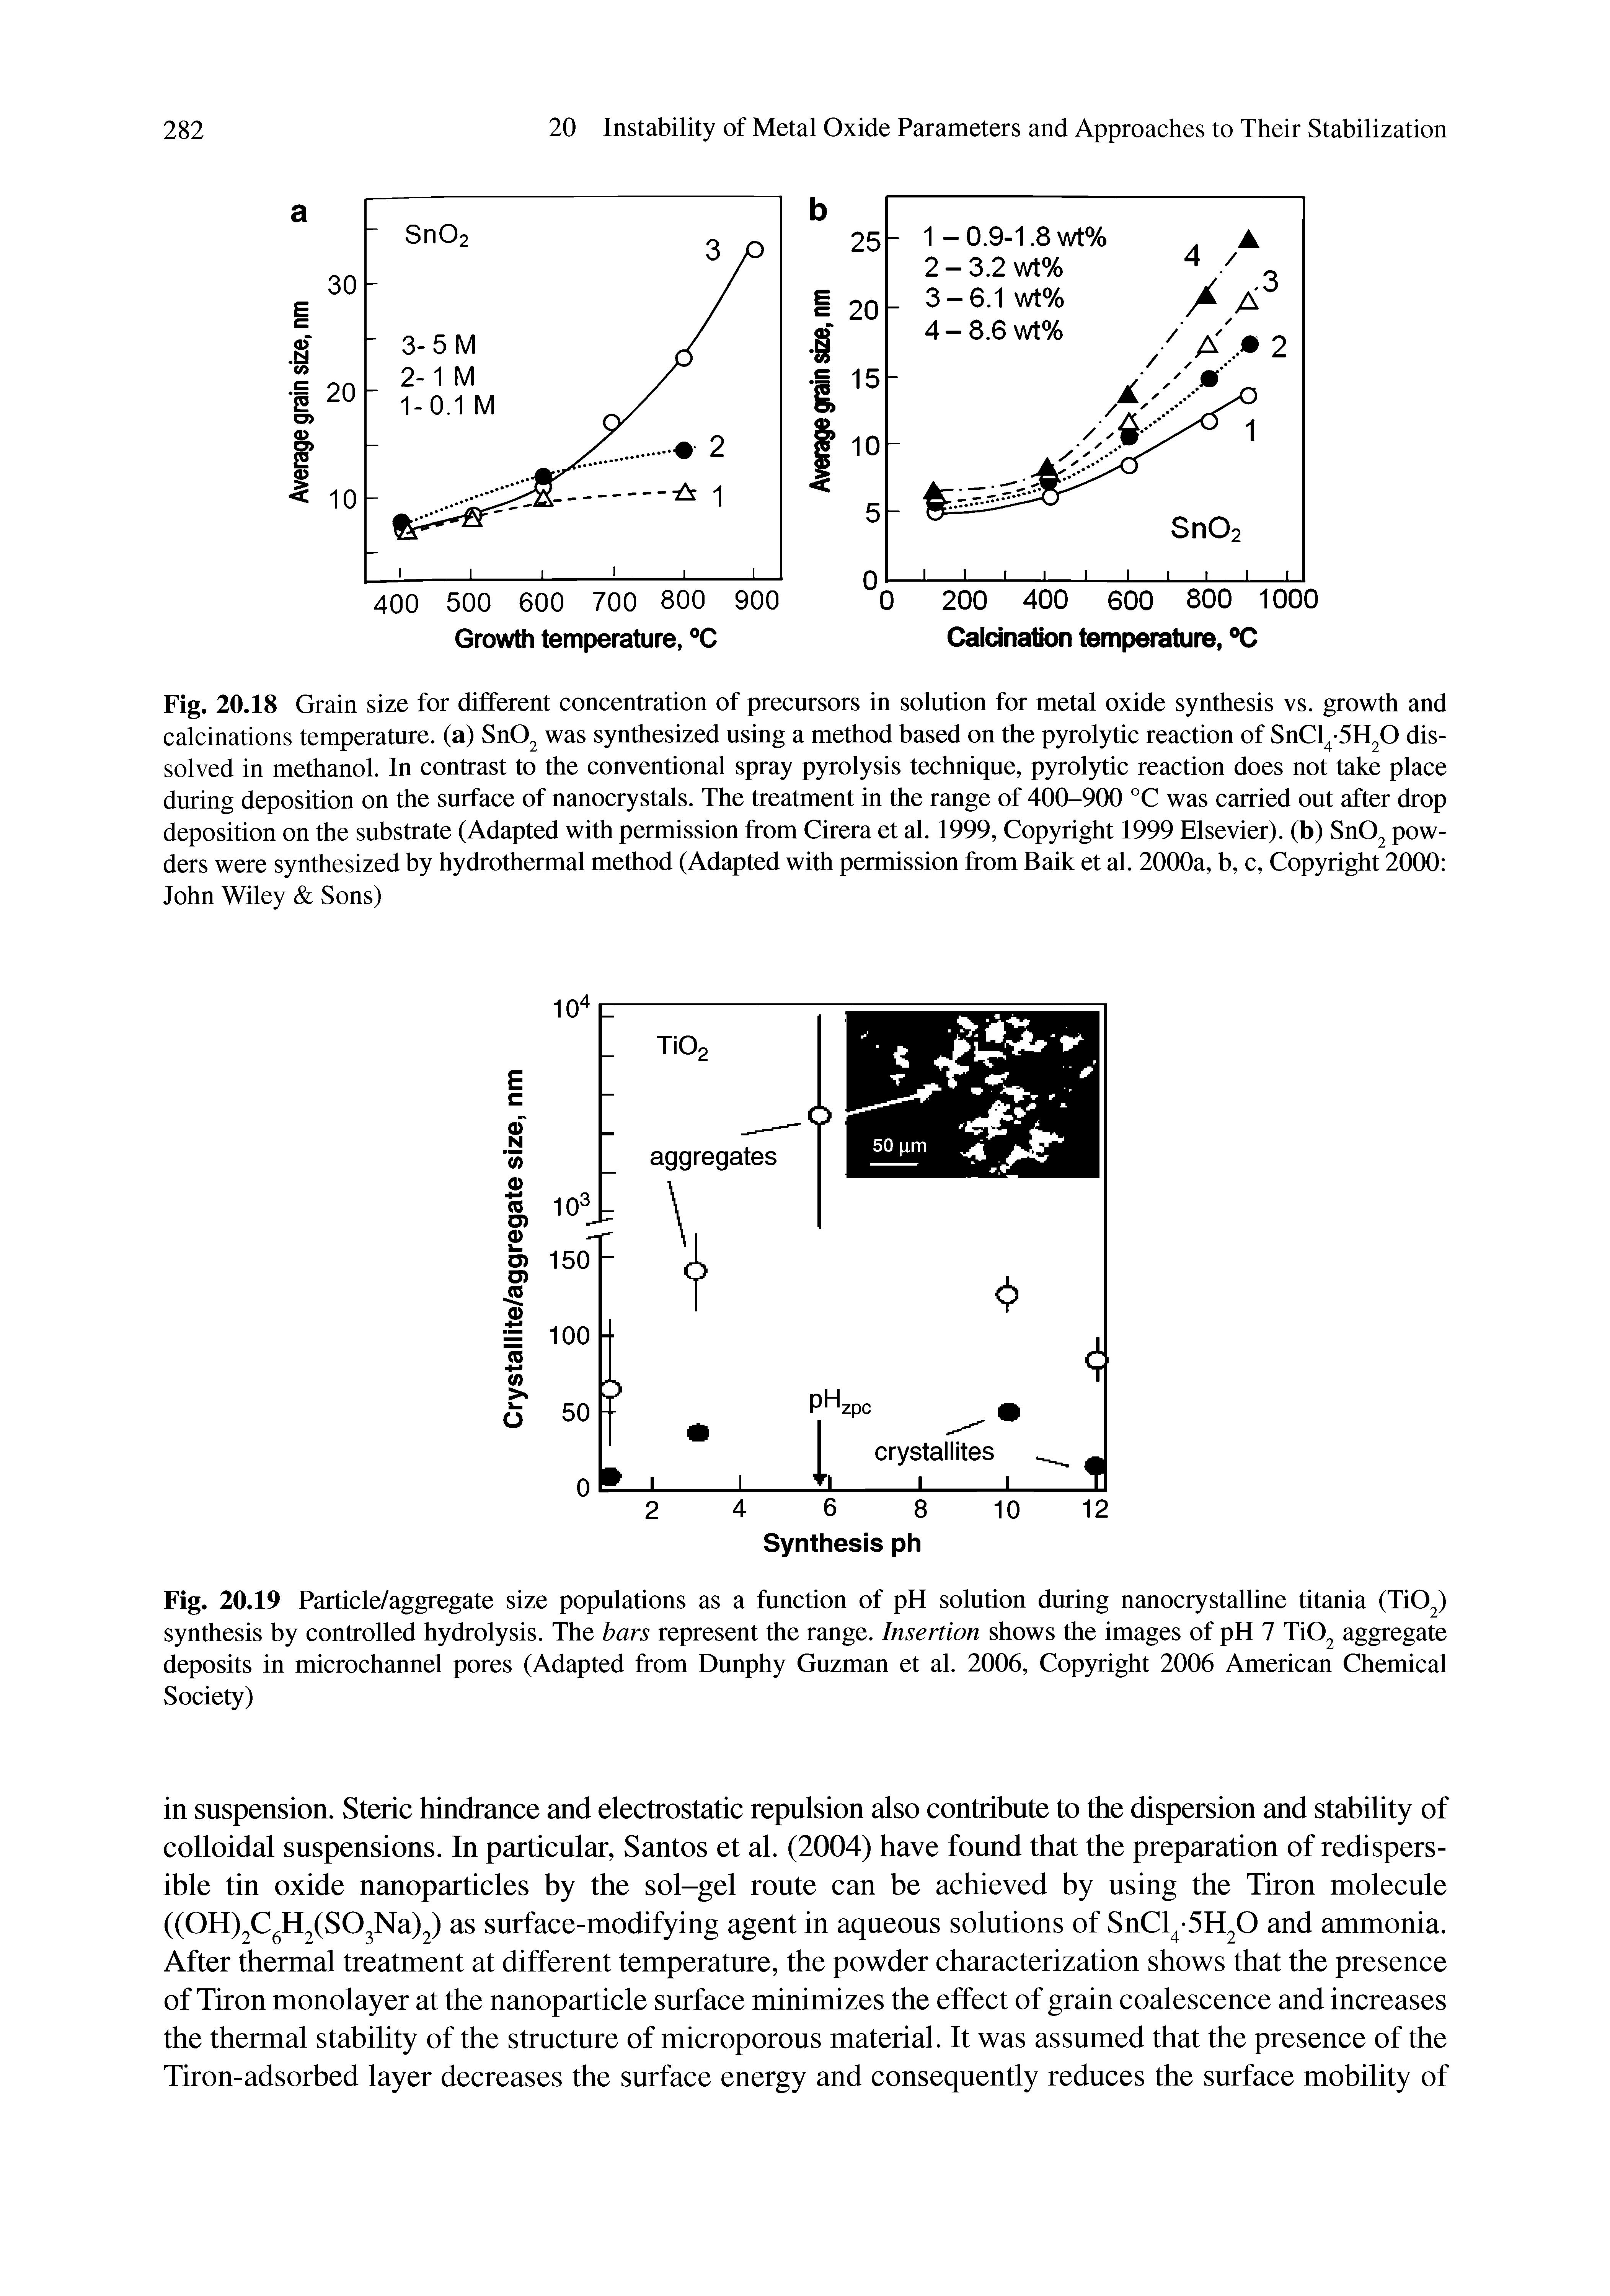 Fig. 20.18 Grain size for different concentration of precursors in solution for metal oxide synthesis vs. growth and calcinations temperature, (a) Sn02 was synthesized using a method based on the pyrolytic reaction of SnCl -SH O dissolved in methanol. In contrast to the conventional spray pyrolysis technique, pyrolytic reaction does not take place during deposition on the surface of nanocrystals. The treatment in the range of 400-900 °C was carried out after drop deposition on the substrate (Adapted with permission from Cirera et al. 1999, Copyright 1999 Elsevier), (b) Sn02 powders were synthesized by hydrothermal method (Adapted with permission from Baik et al. 2000a, b, c. Copyright 2000 John Wiley Sons)...